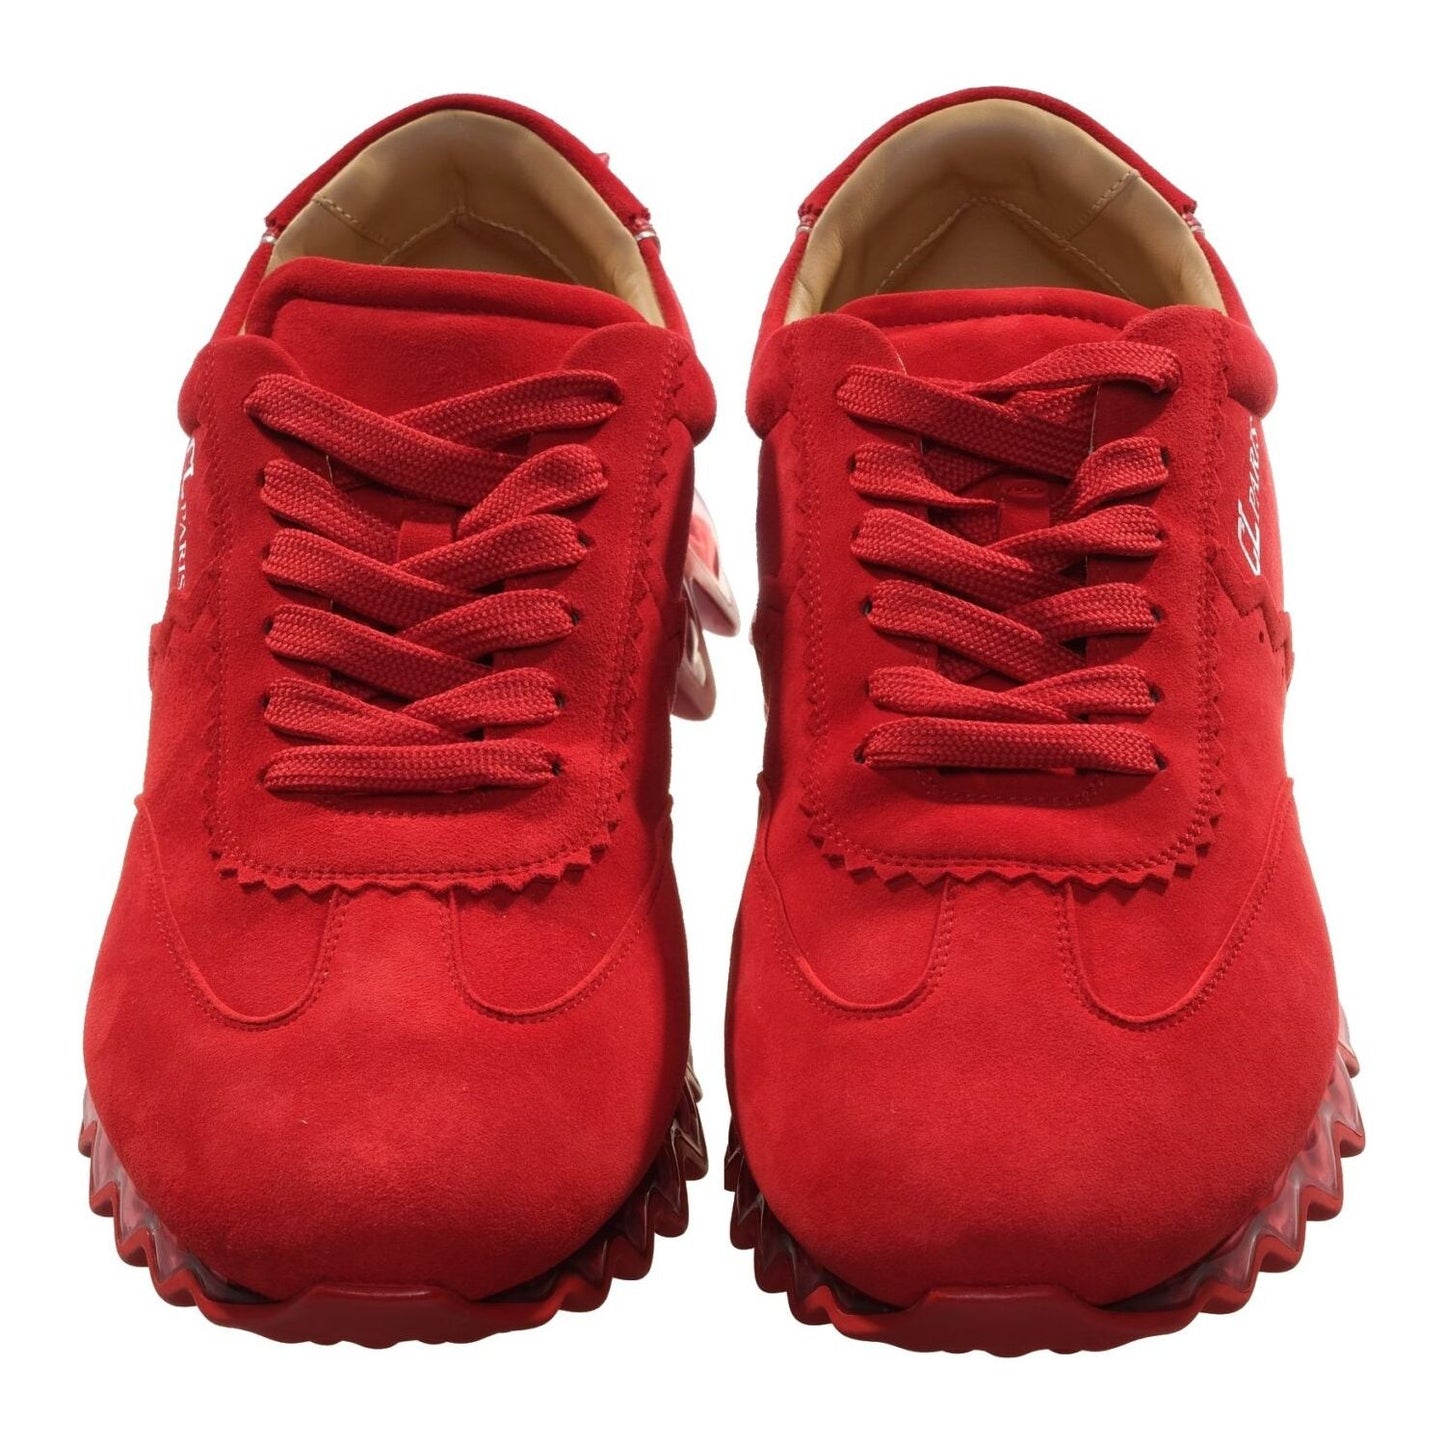 Loubishark Flat Red Suede Laceup Sneakers